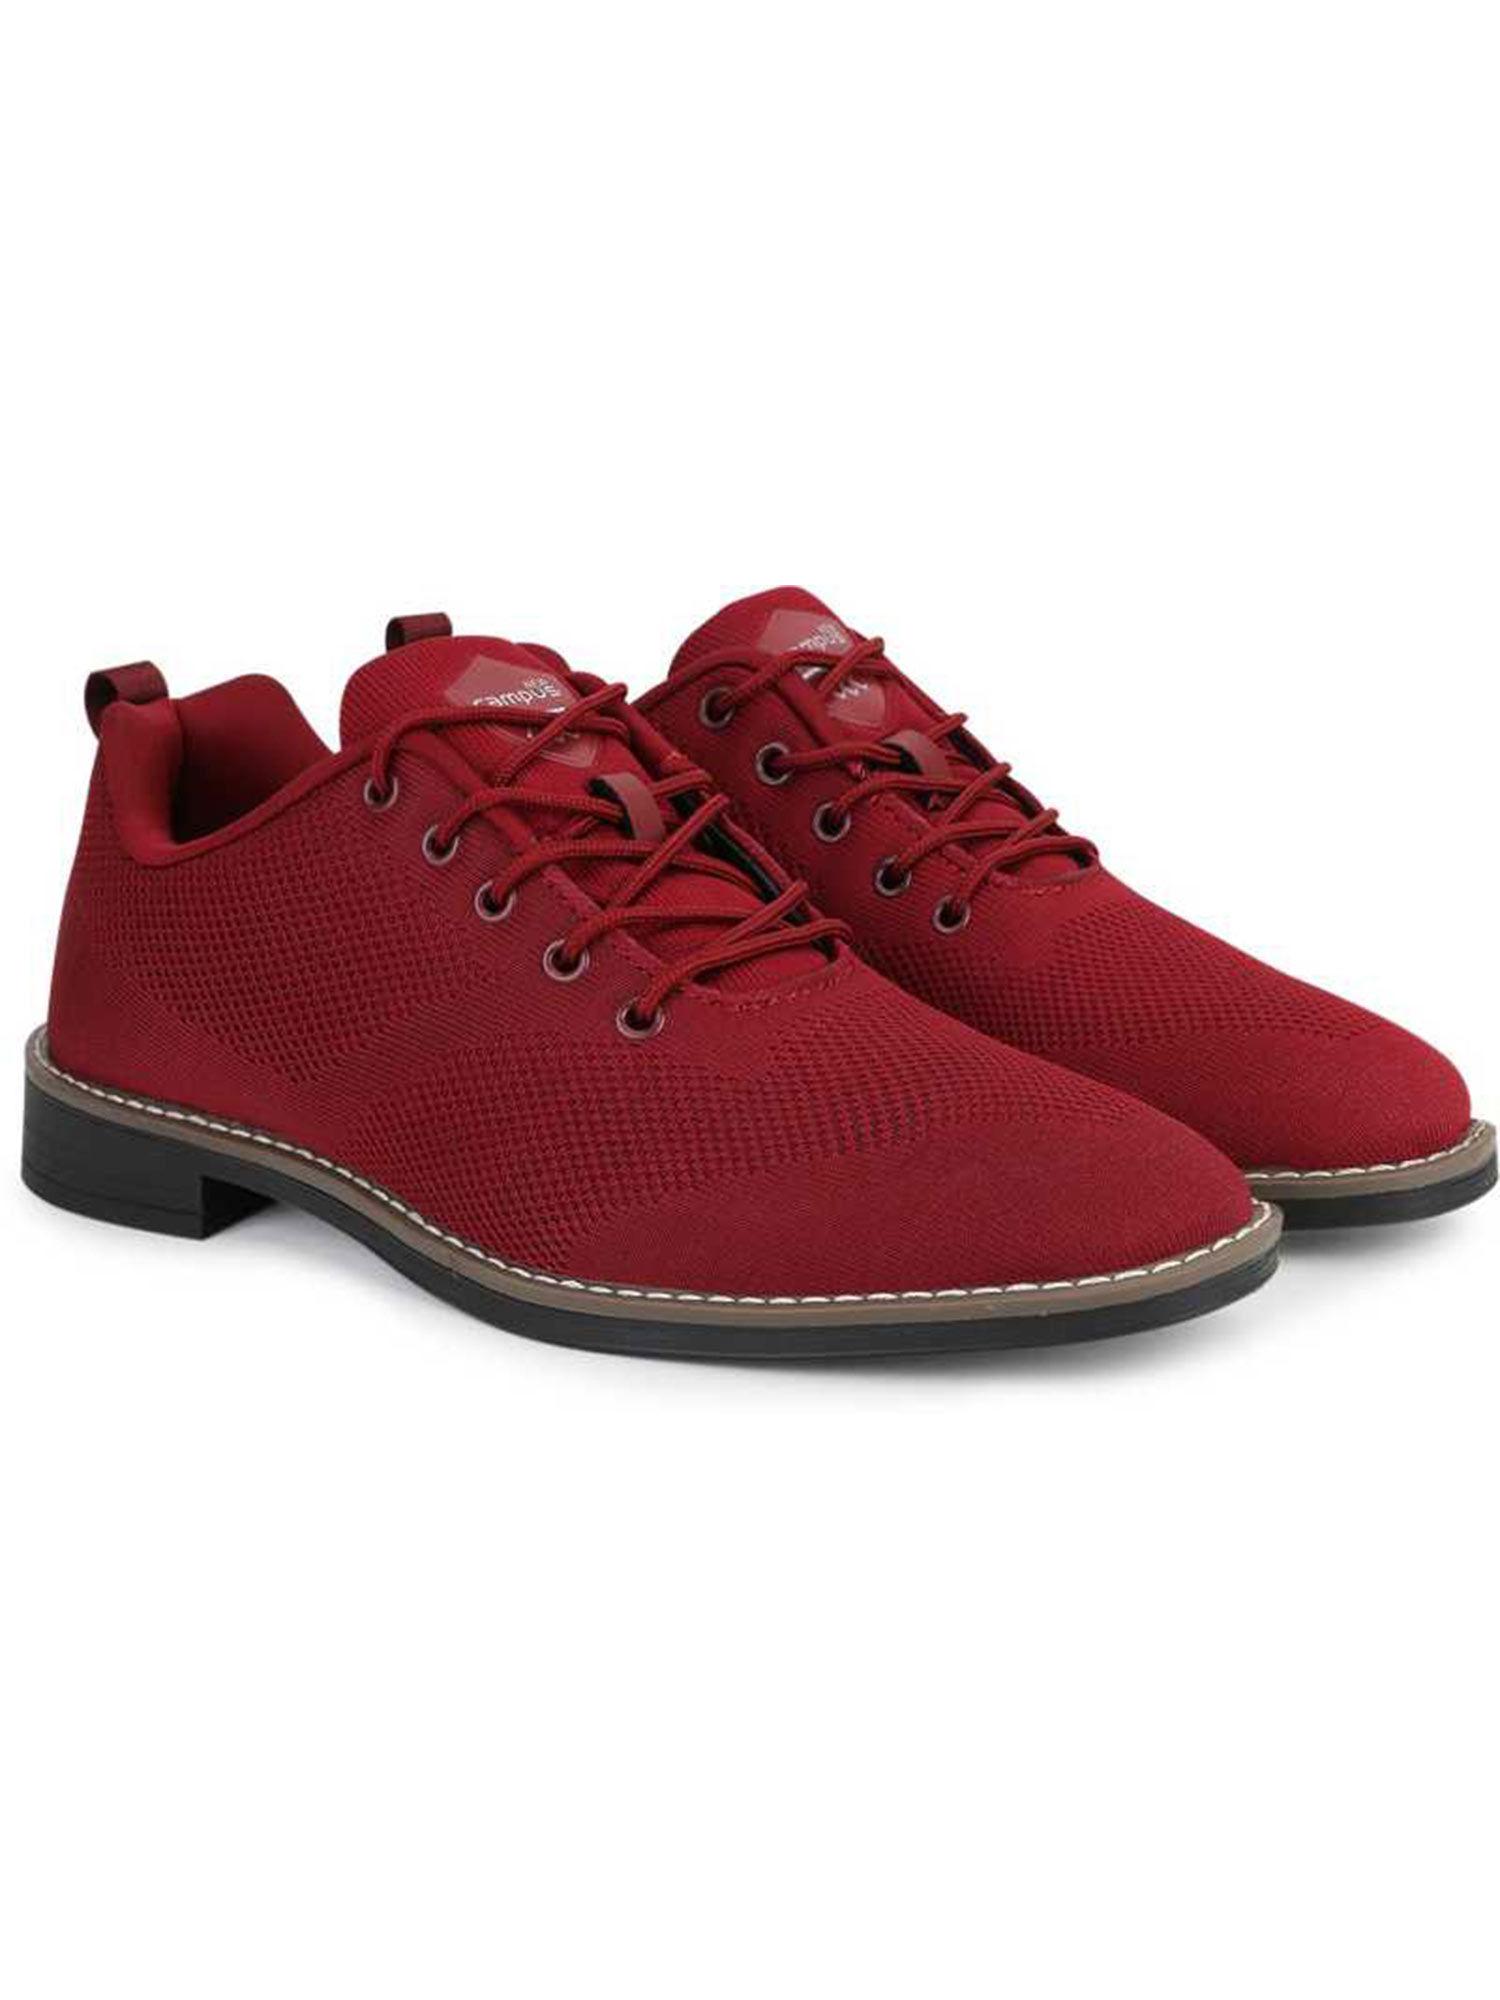 classy burgundy casual shoes for men